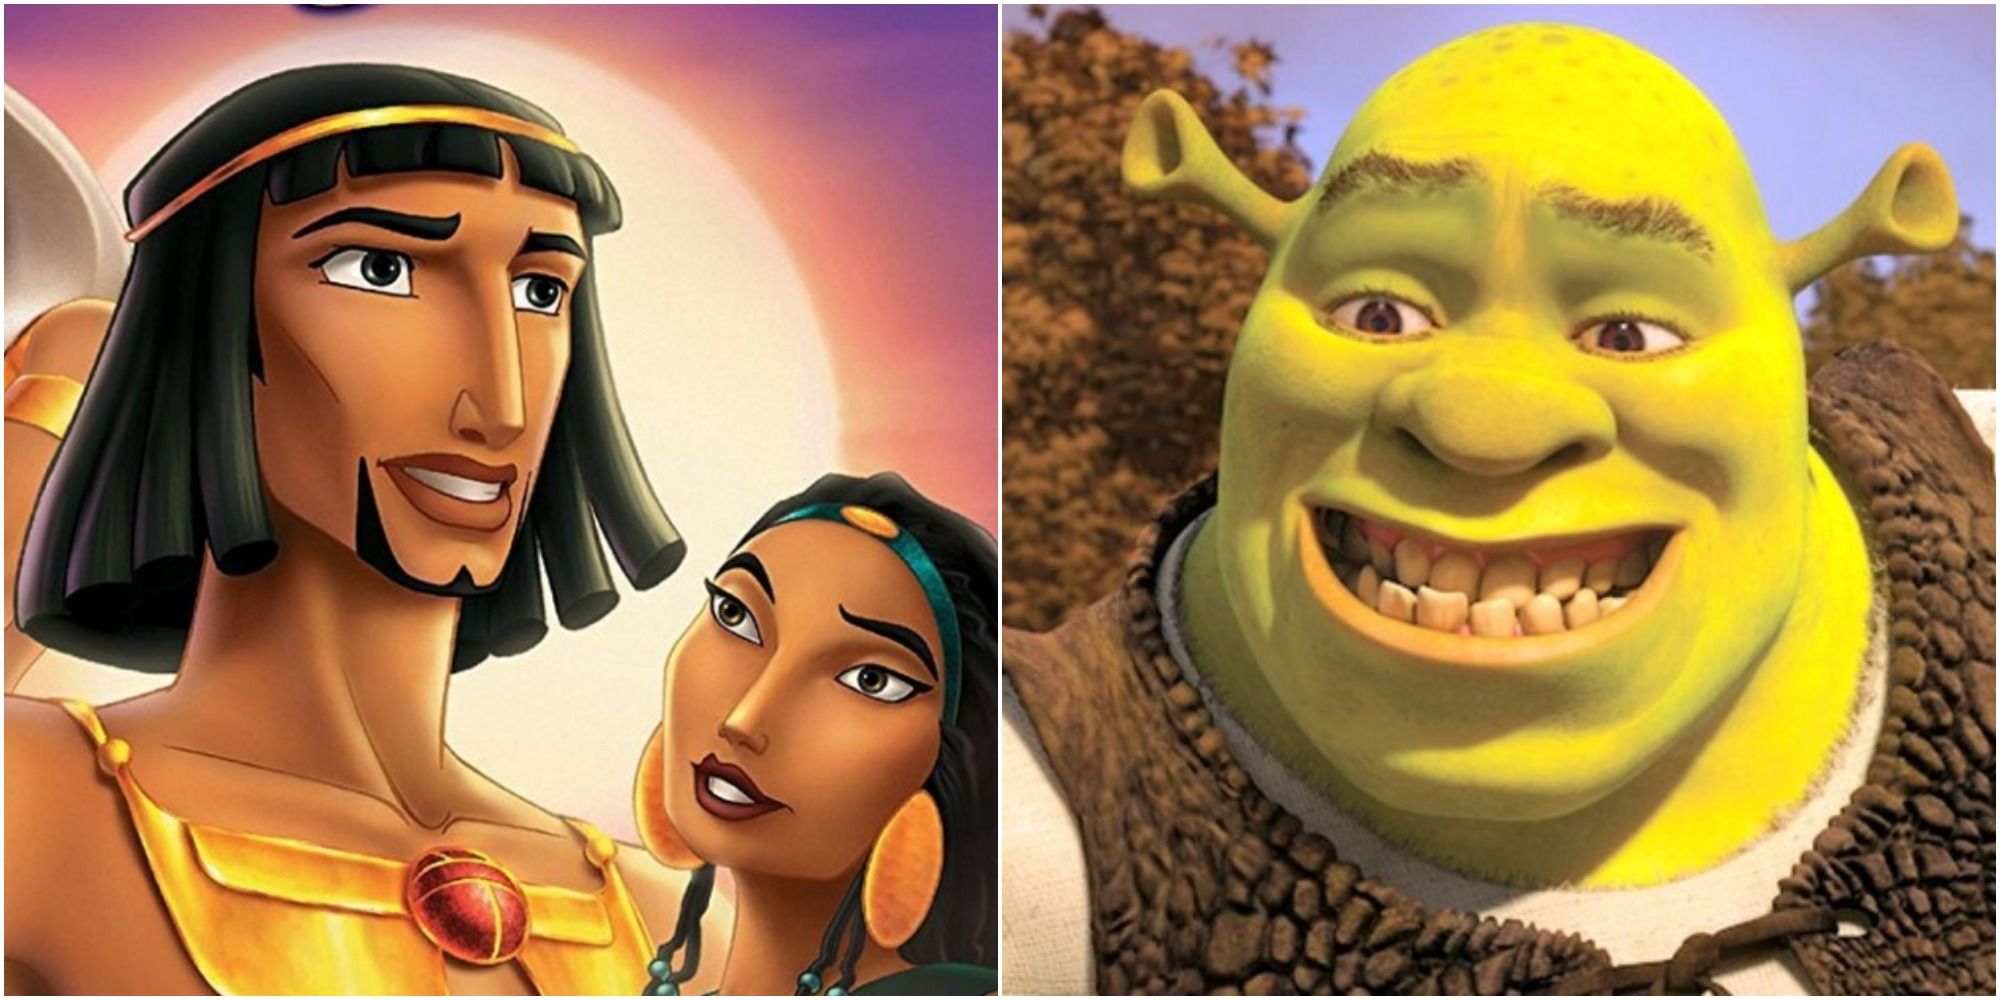 10 DreamWorks Movies That Can Be Enjoyed By Both Kids & Adults